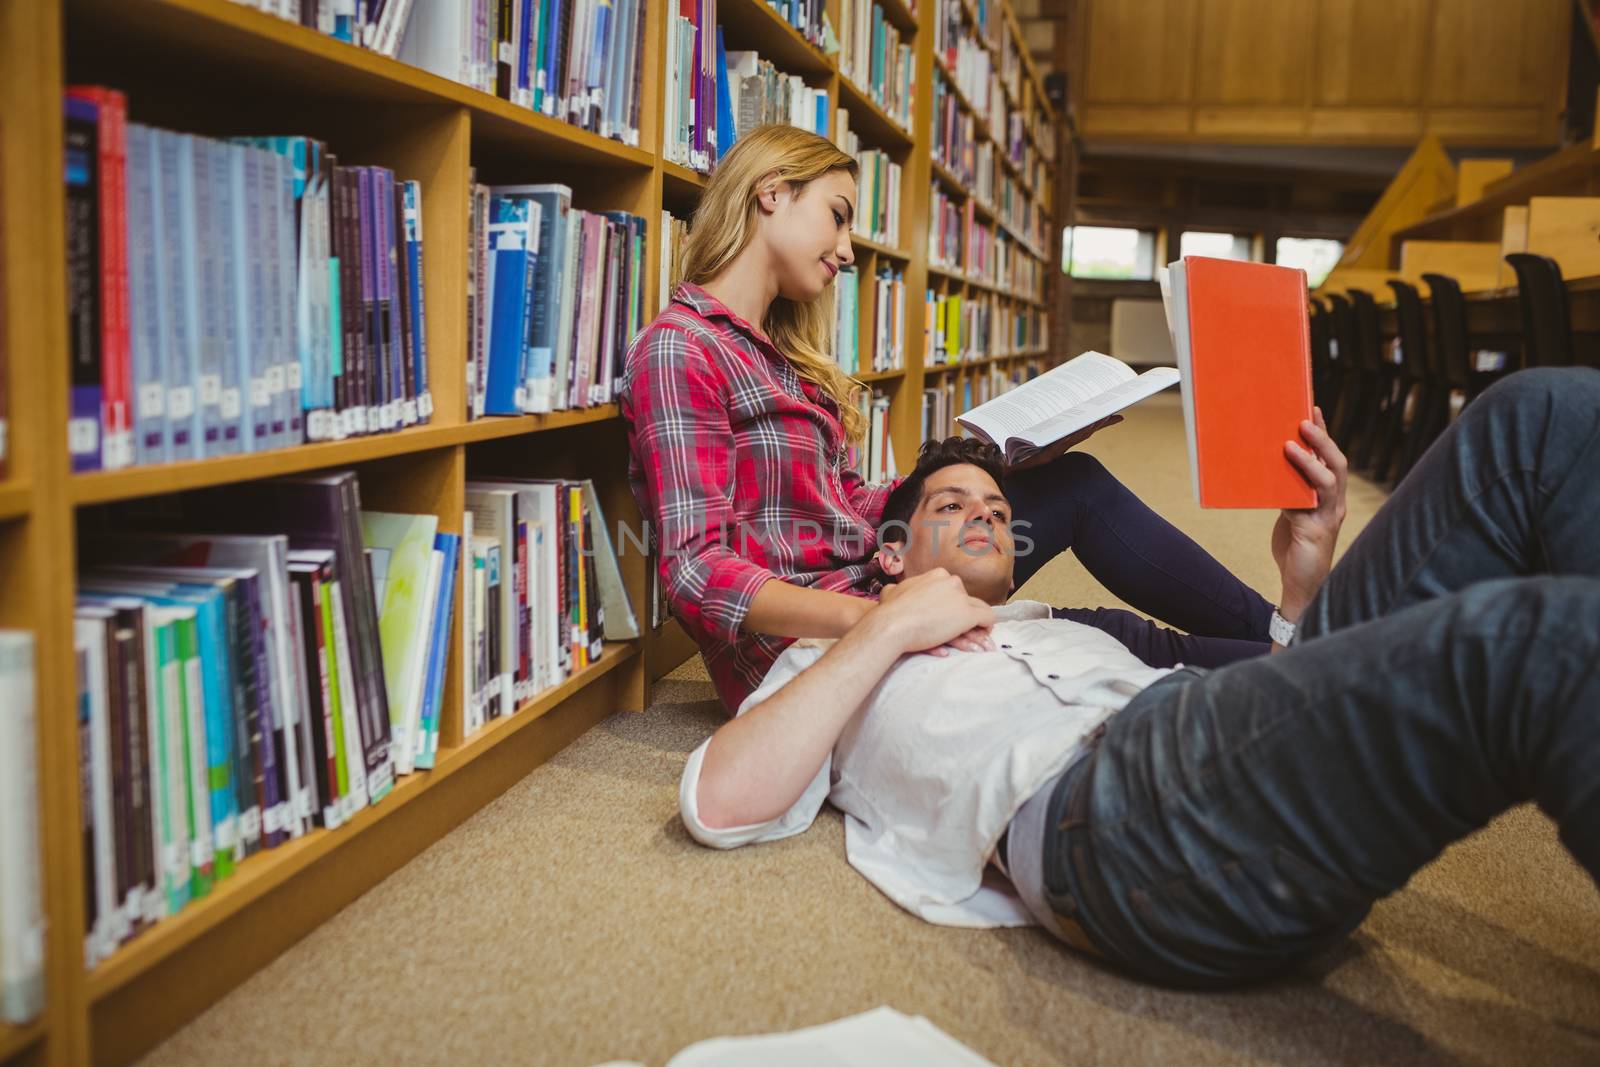 Student reading book while lying on his classmate in library